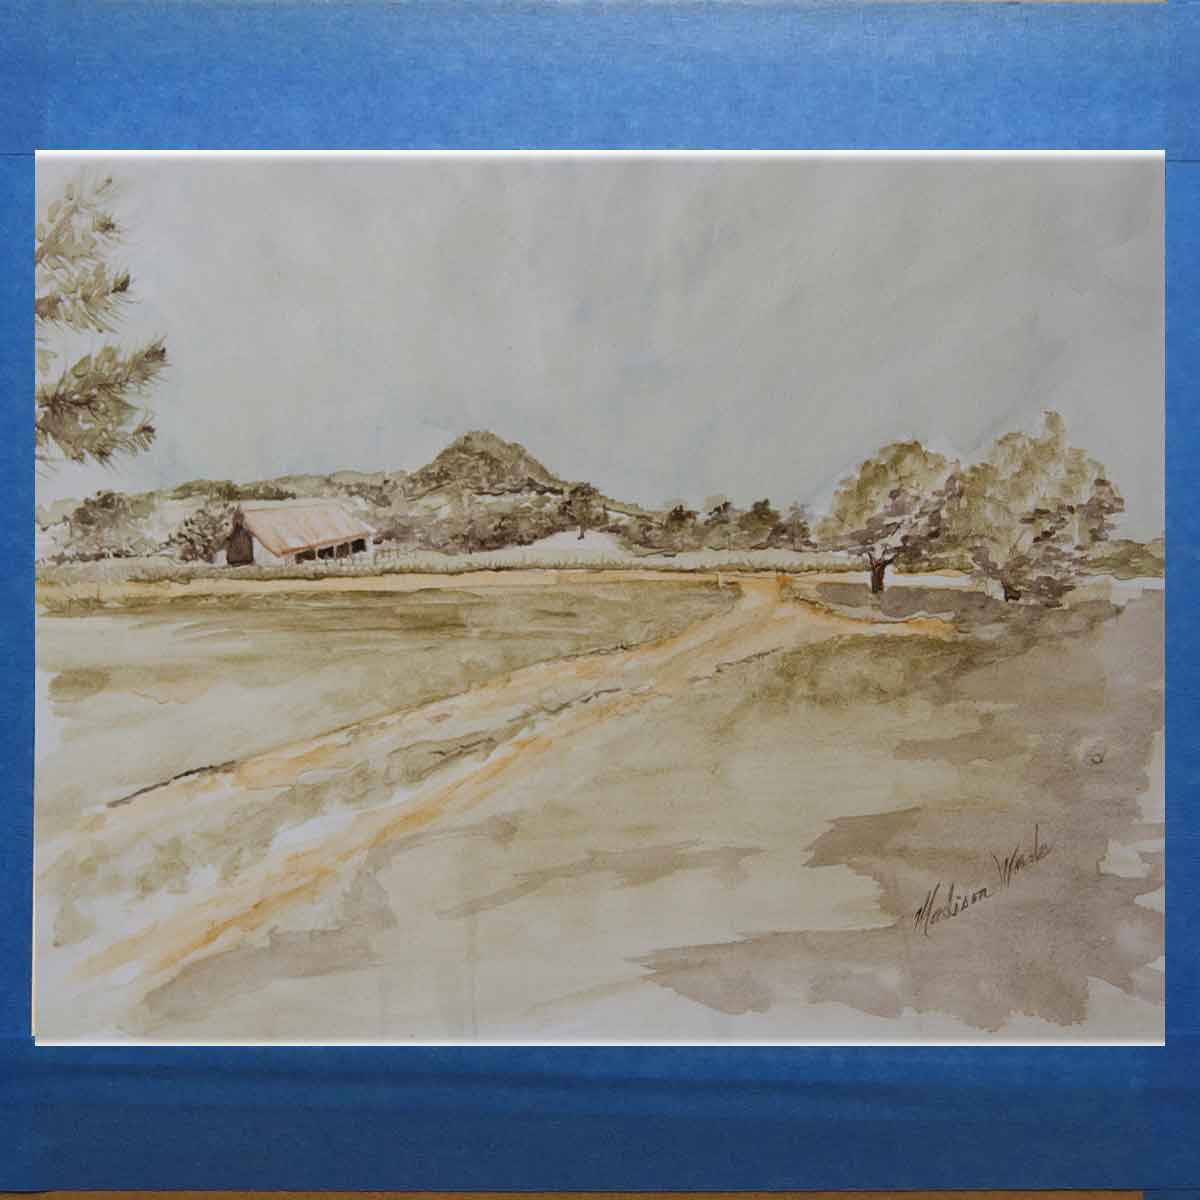 Painting of a farm.